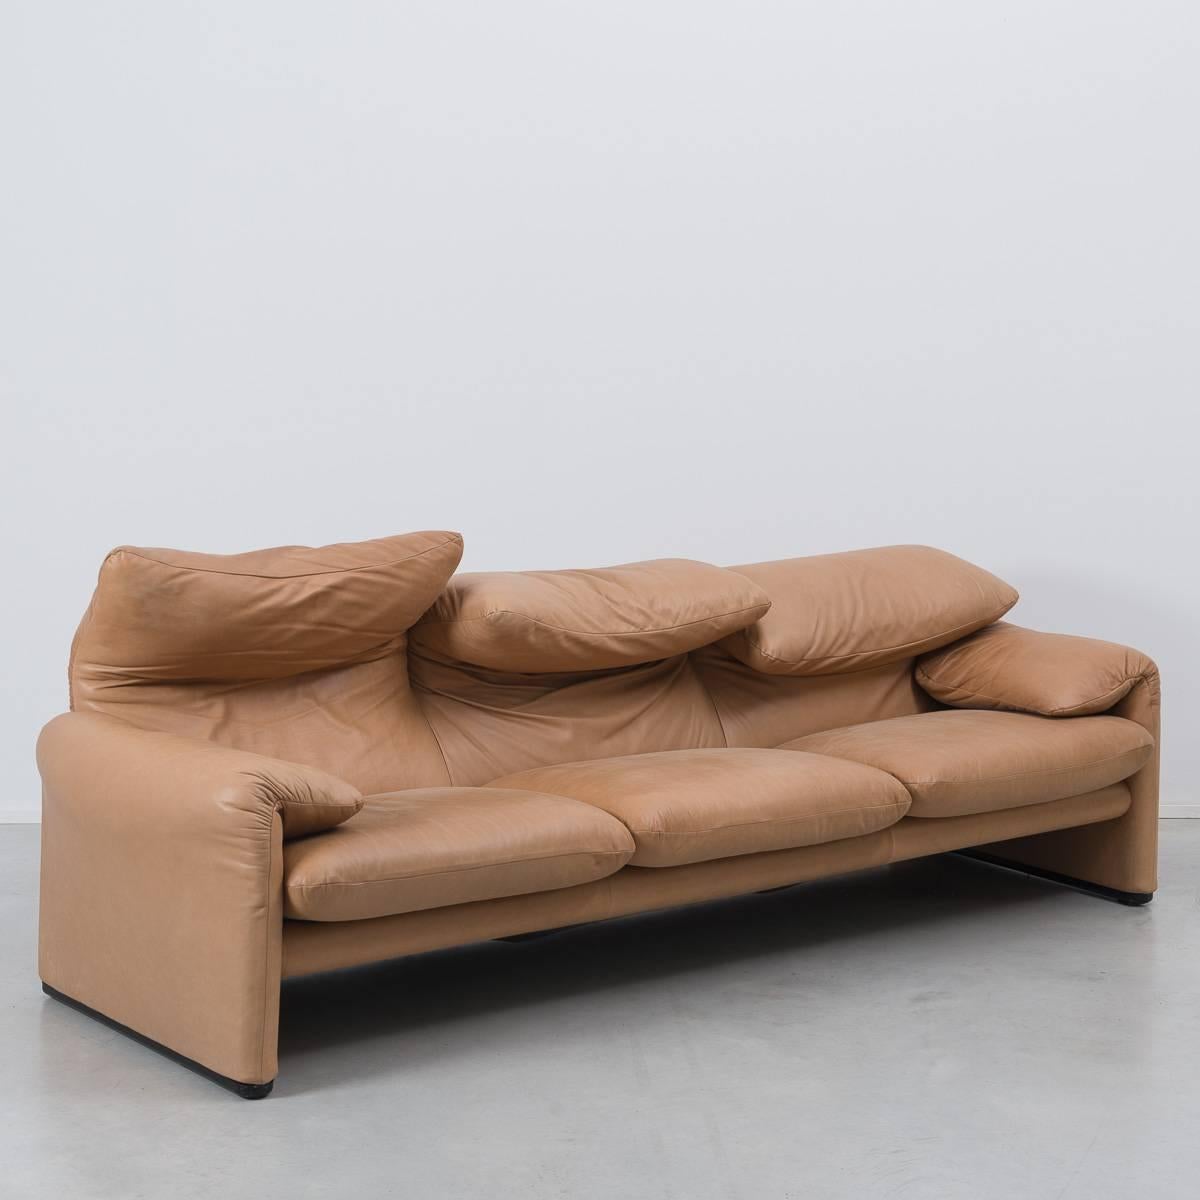 The Maralunga sofa by Magistretti for Cassina was designed in 1973 and quickly became a design Classic. Its clever design incorporates manipulatable back cushions that can sit low, directly behind the user when seated, or extended up to provide the